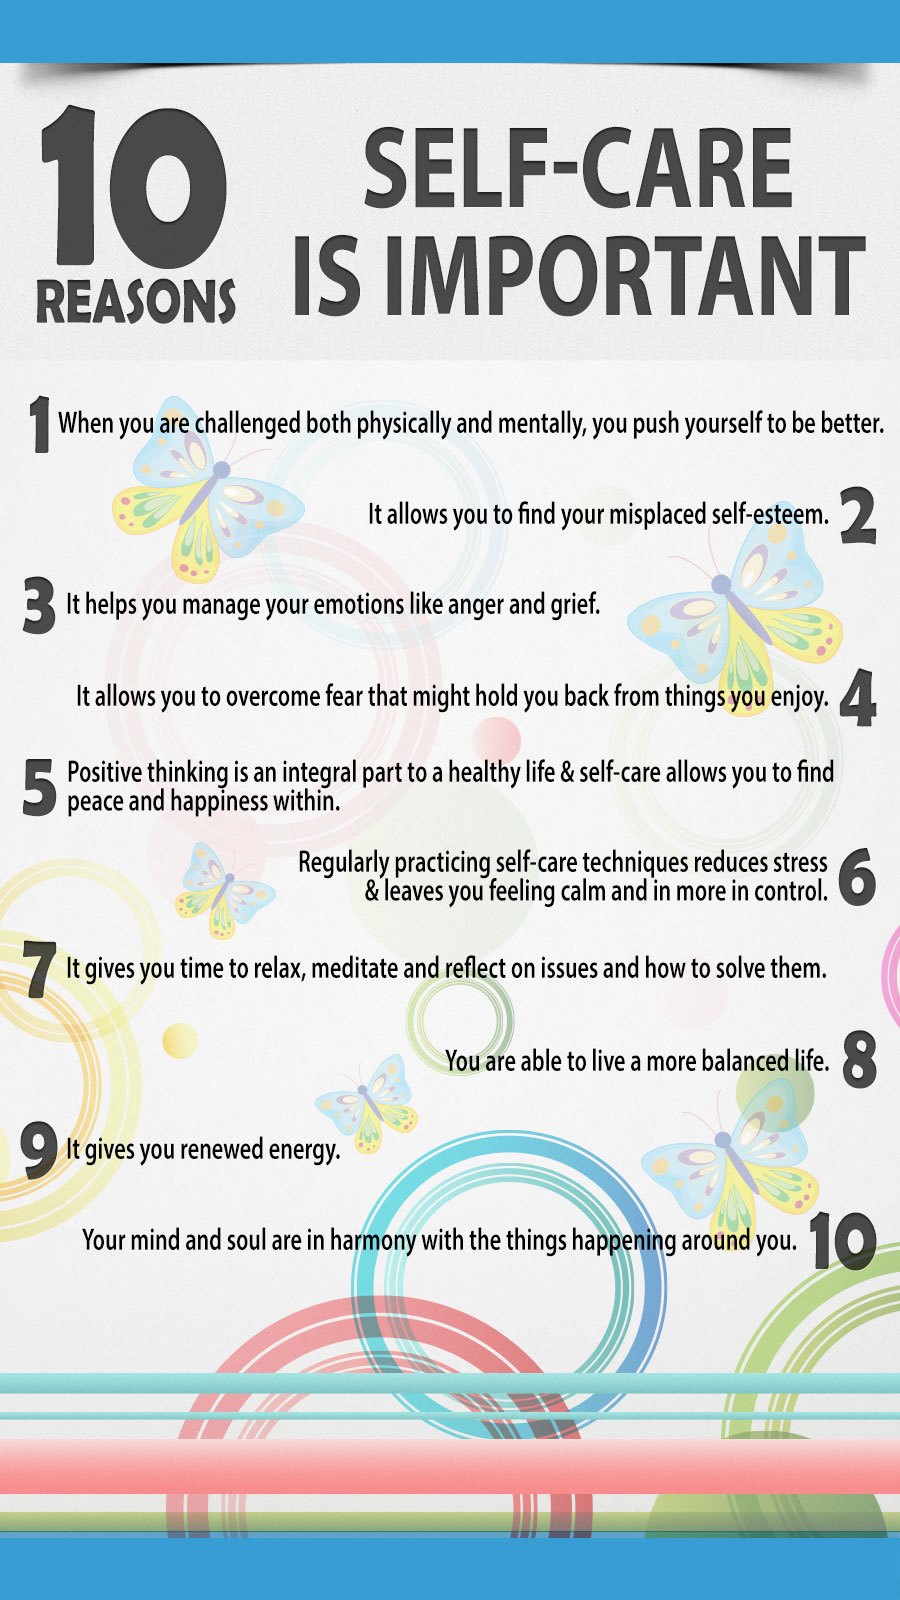 10 Reasons Self Care is Important